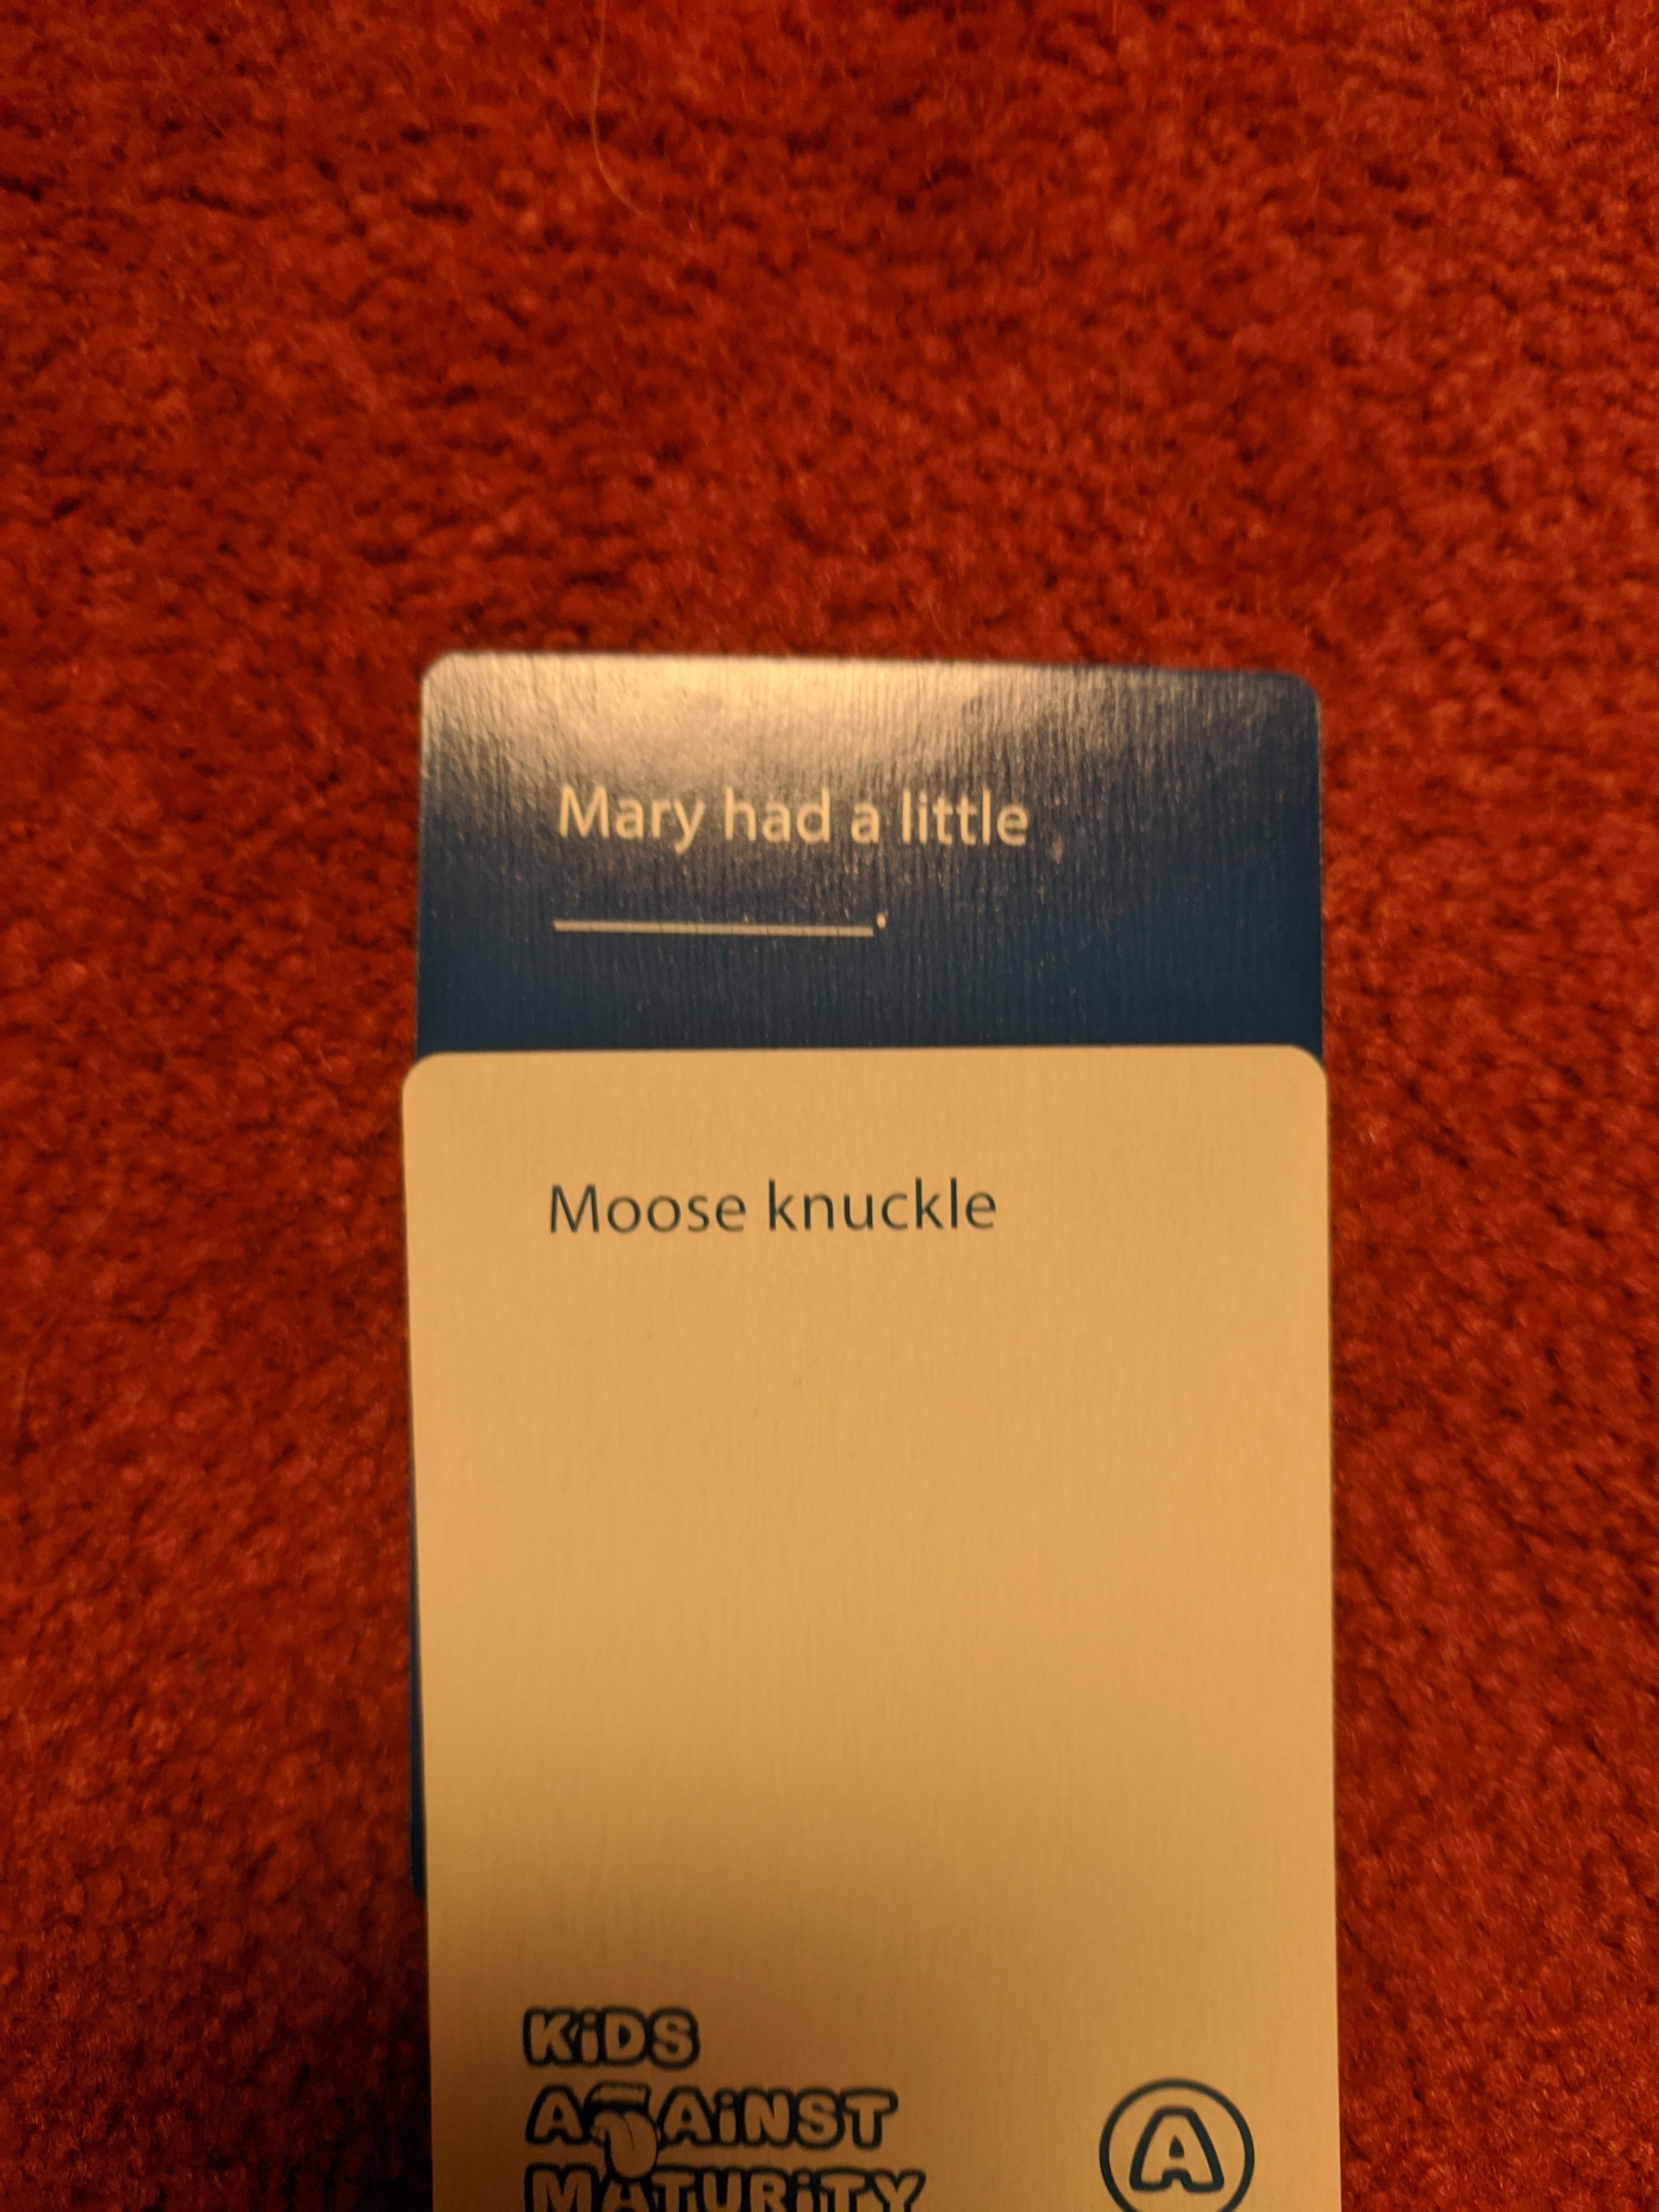 Played "Kids Against Maturity" on Christmas and my 13-yr-old throws this one down. Something tells me this game isn't really 8+.